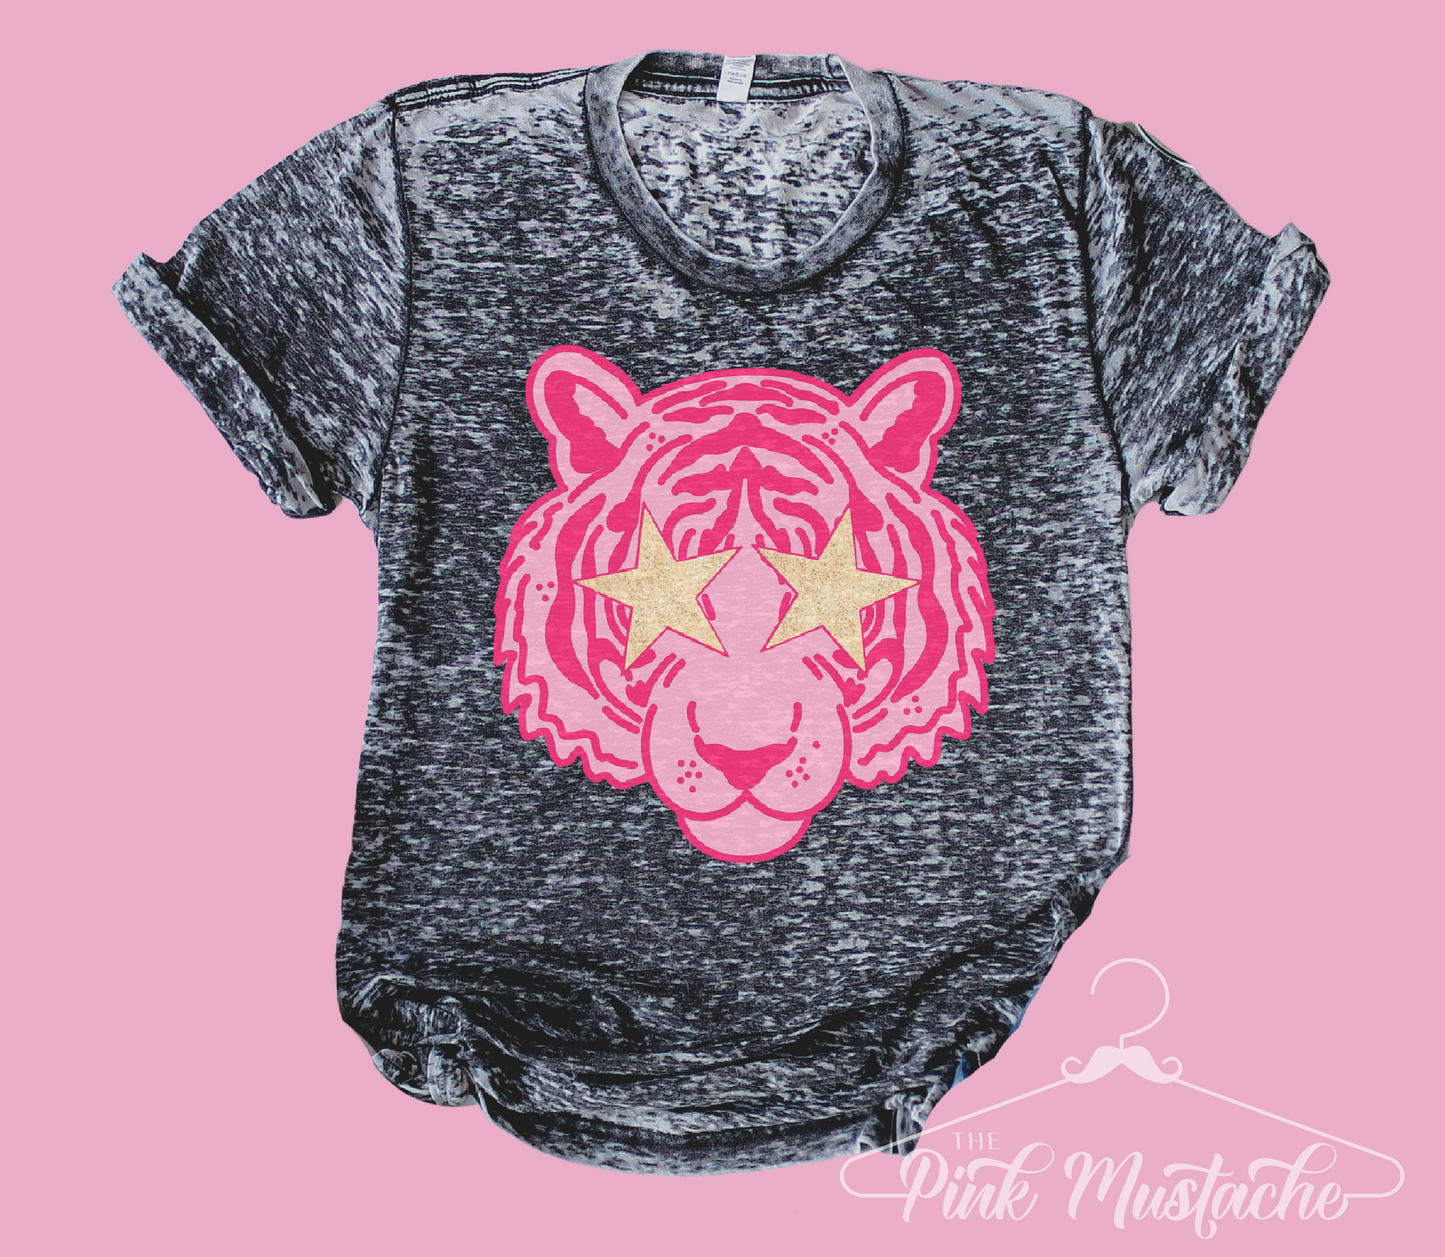 Acid Washed Bright Pink Tiger Star Tee/ Quality Acid Washed Retro Tee